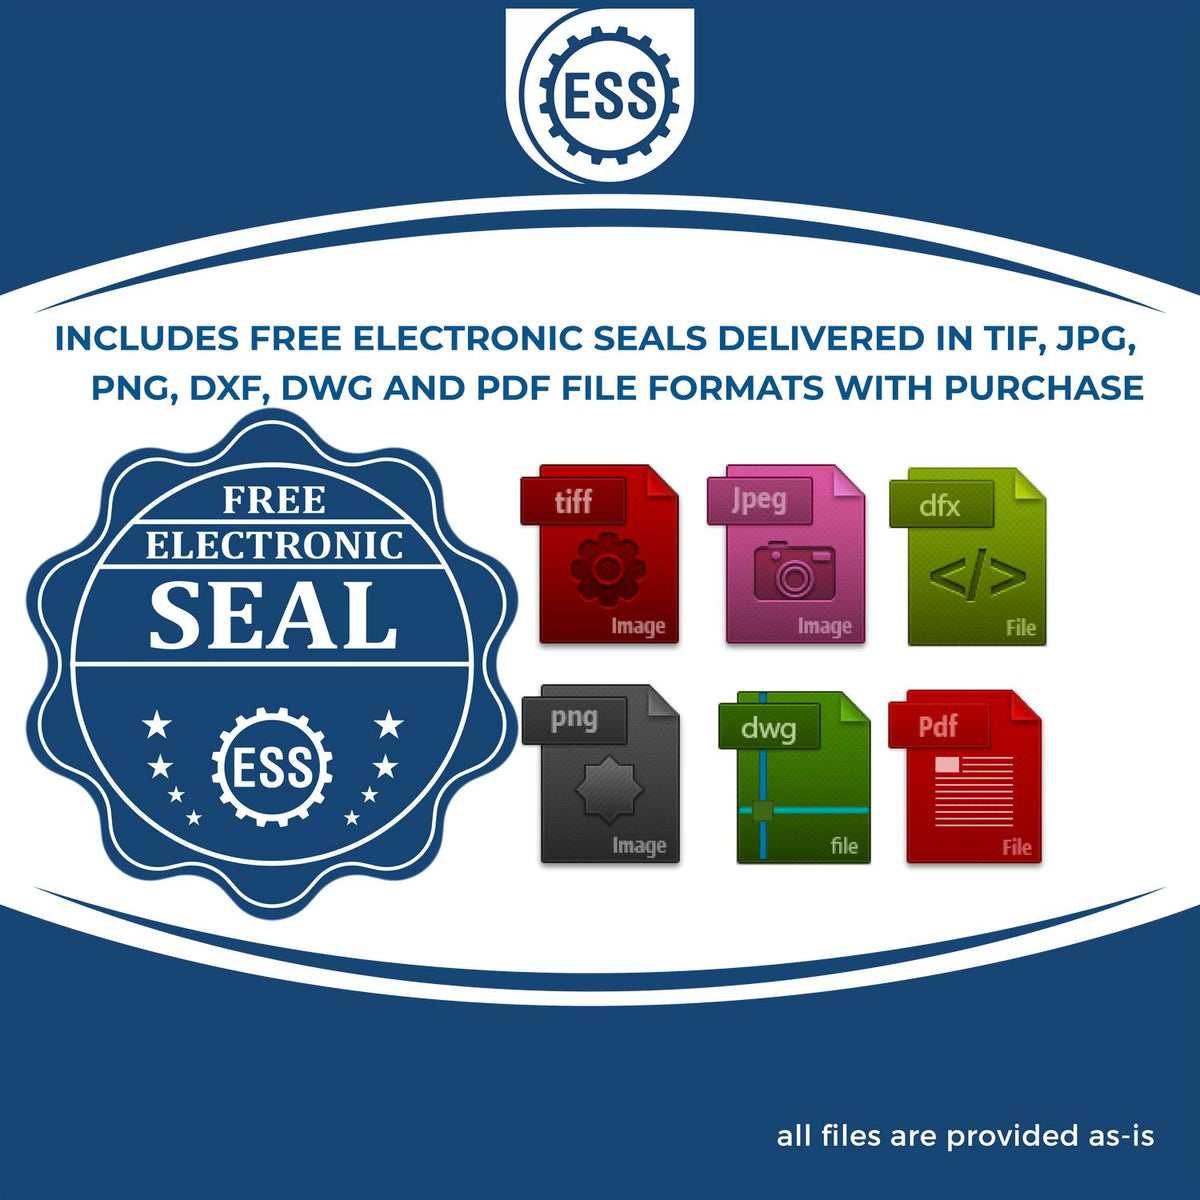 An infographic for the free electronic seal for the Heavy Duty Cast Iron Kentucky Land Surveyor Seal Embosser illustrating the different file type icons such as DXF, DWG, TIF, JPG and PNG.